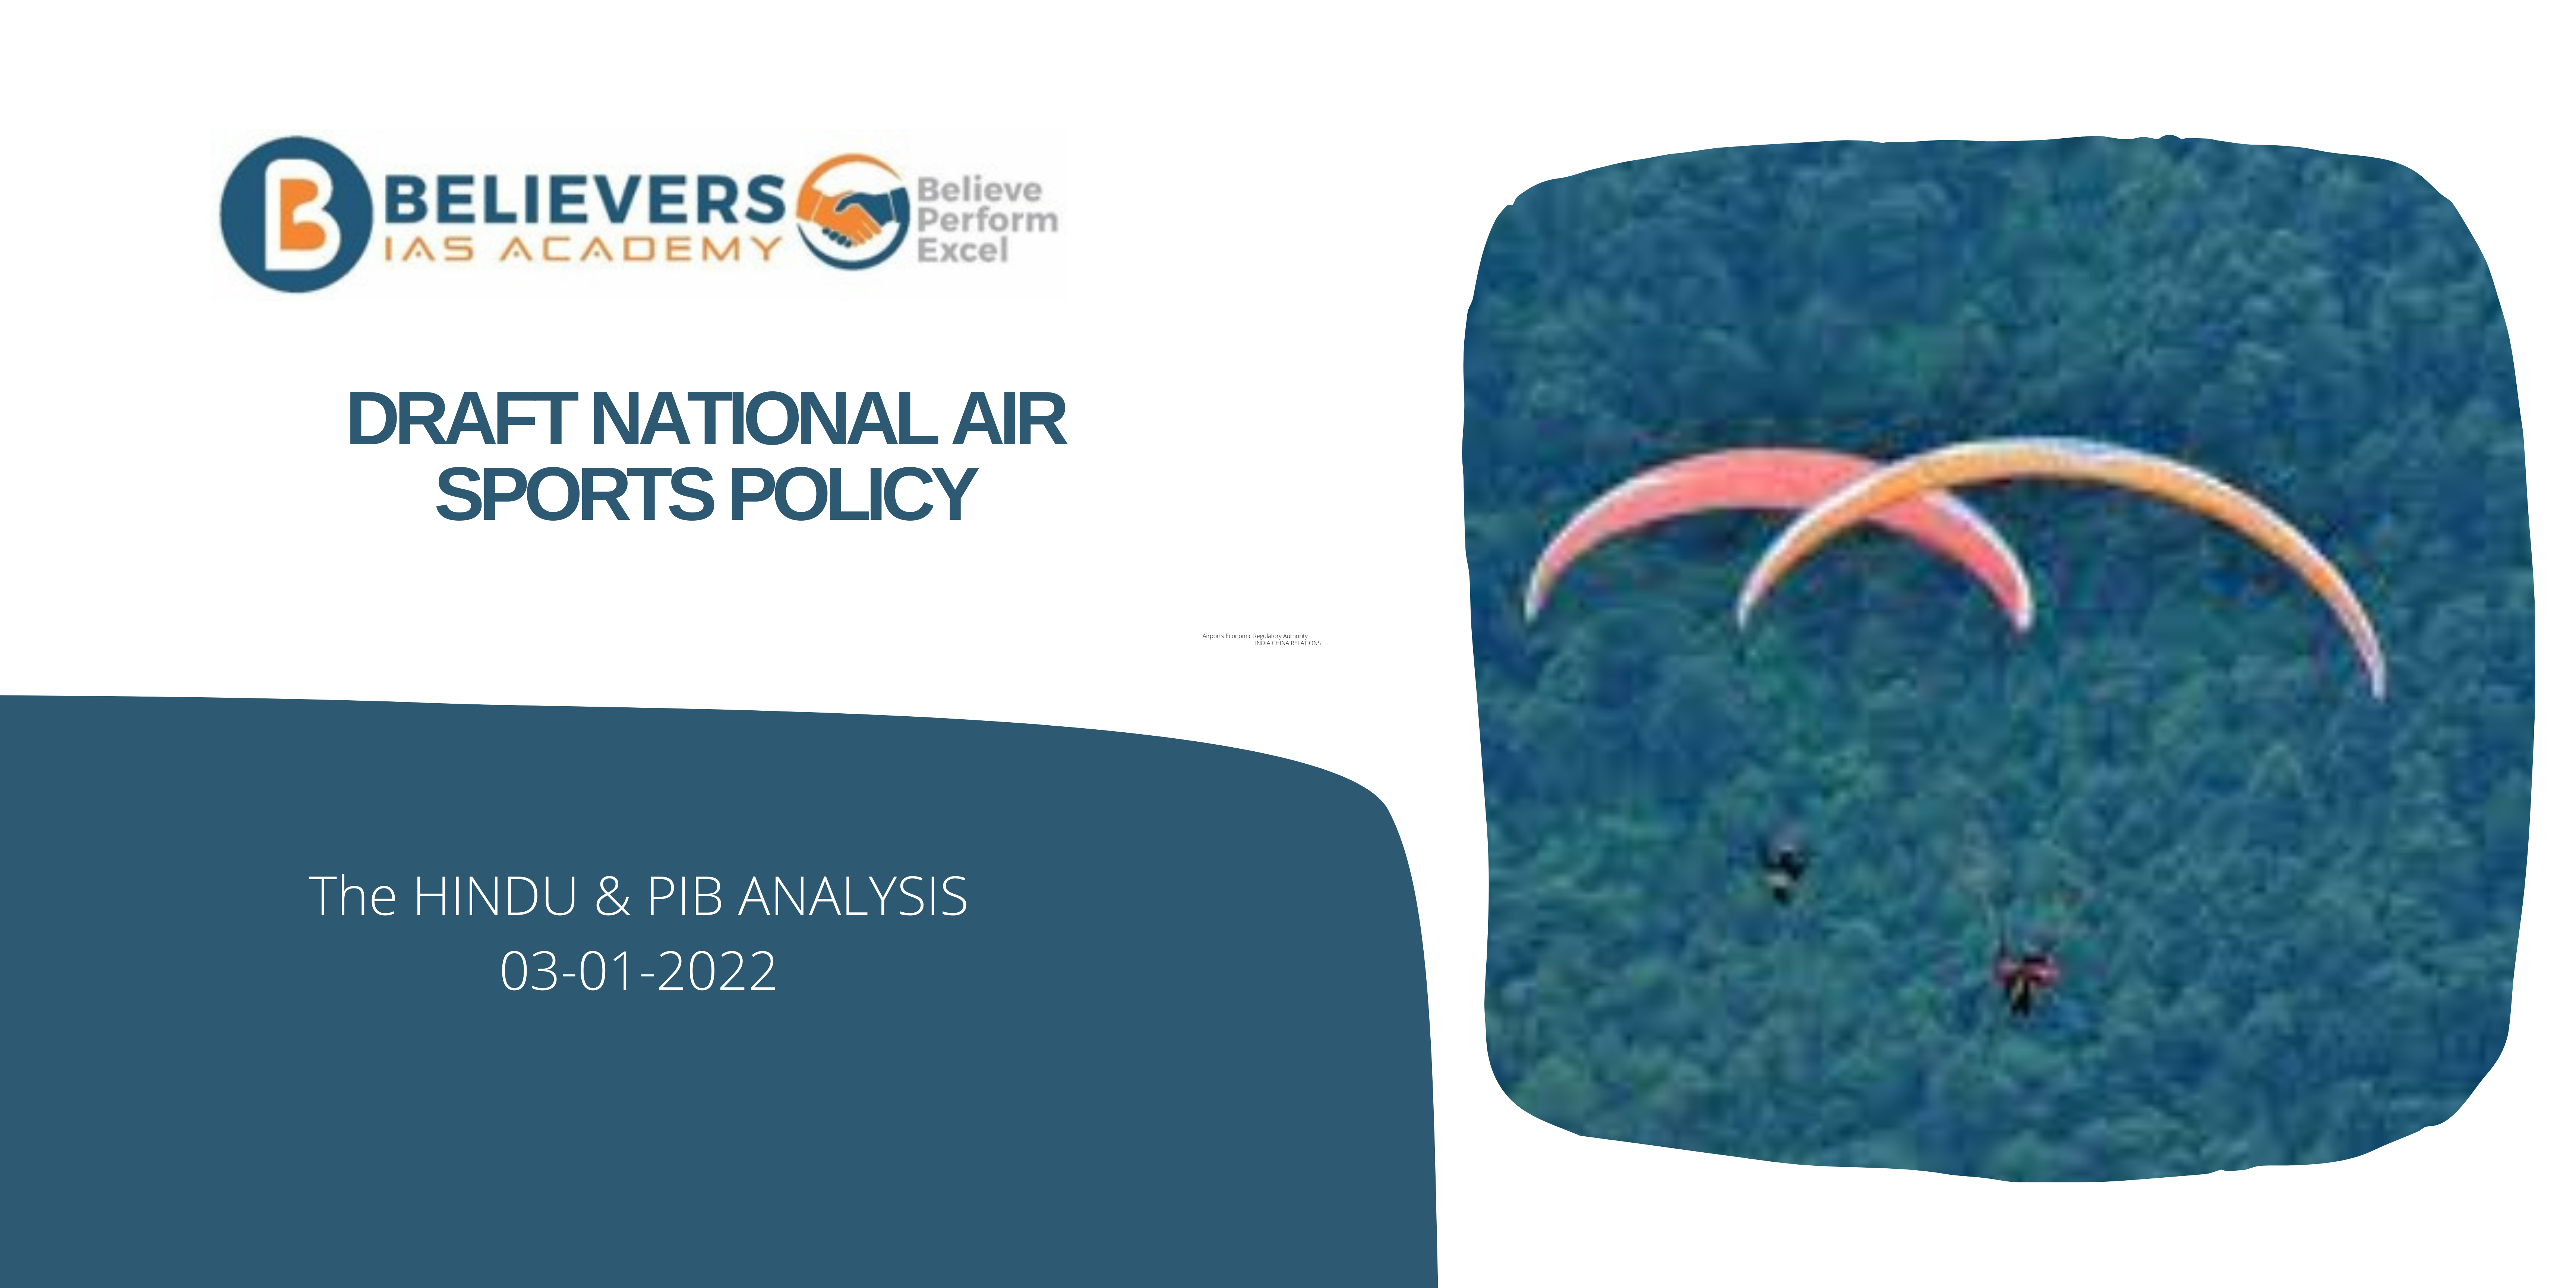 Civil services Current affairs - DRAFT NATIONAL AIR SPORTS POLICY